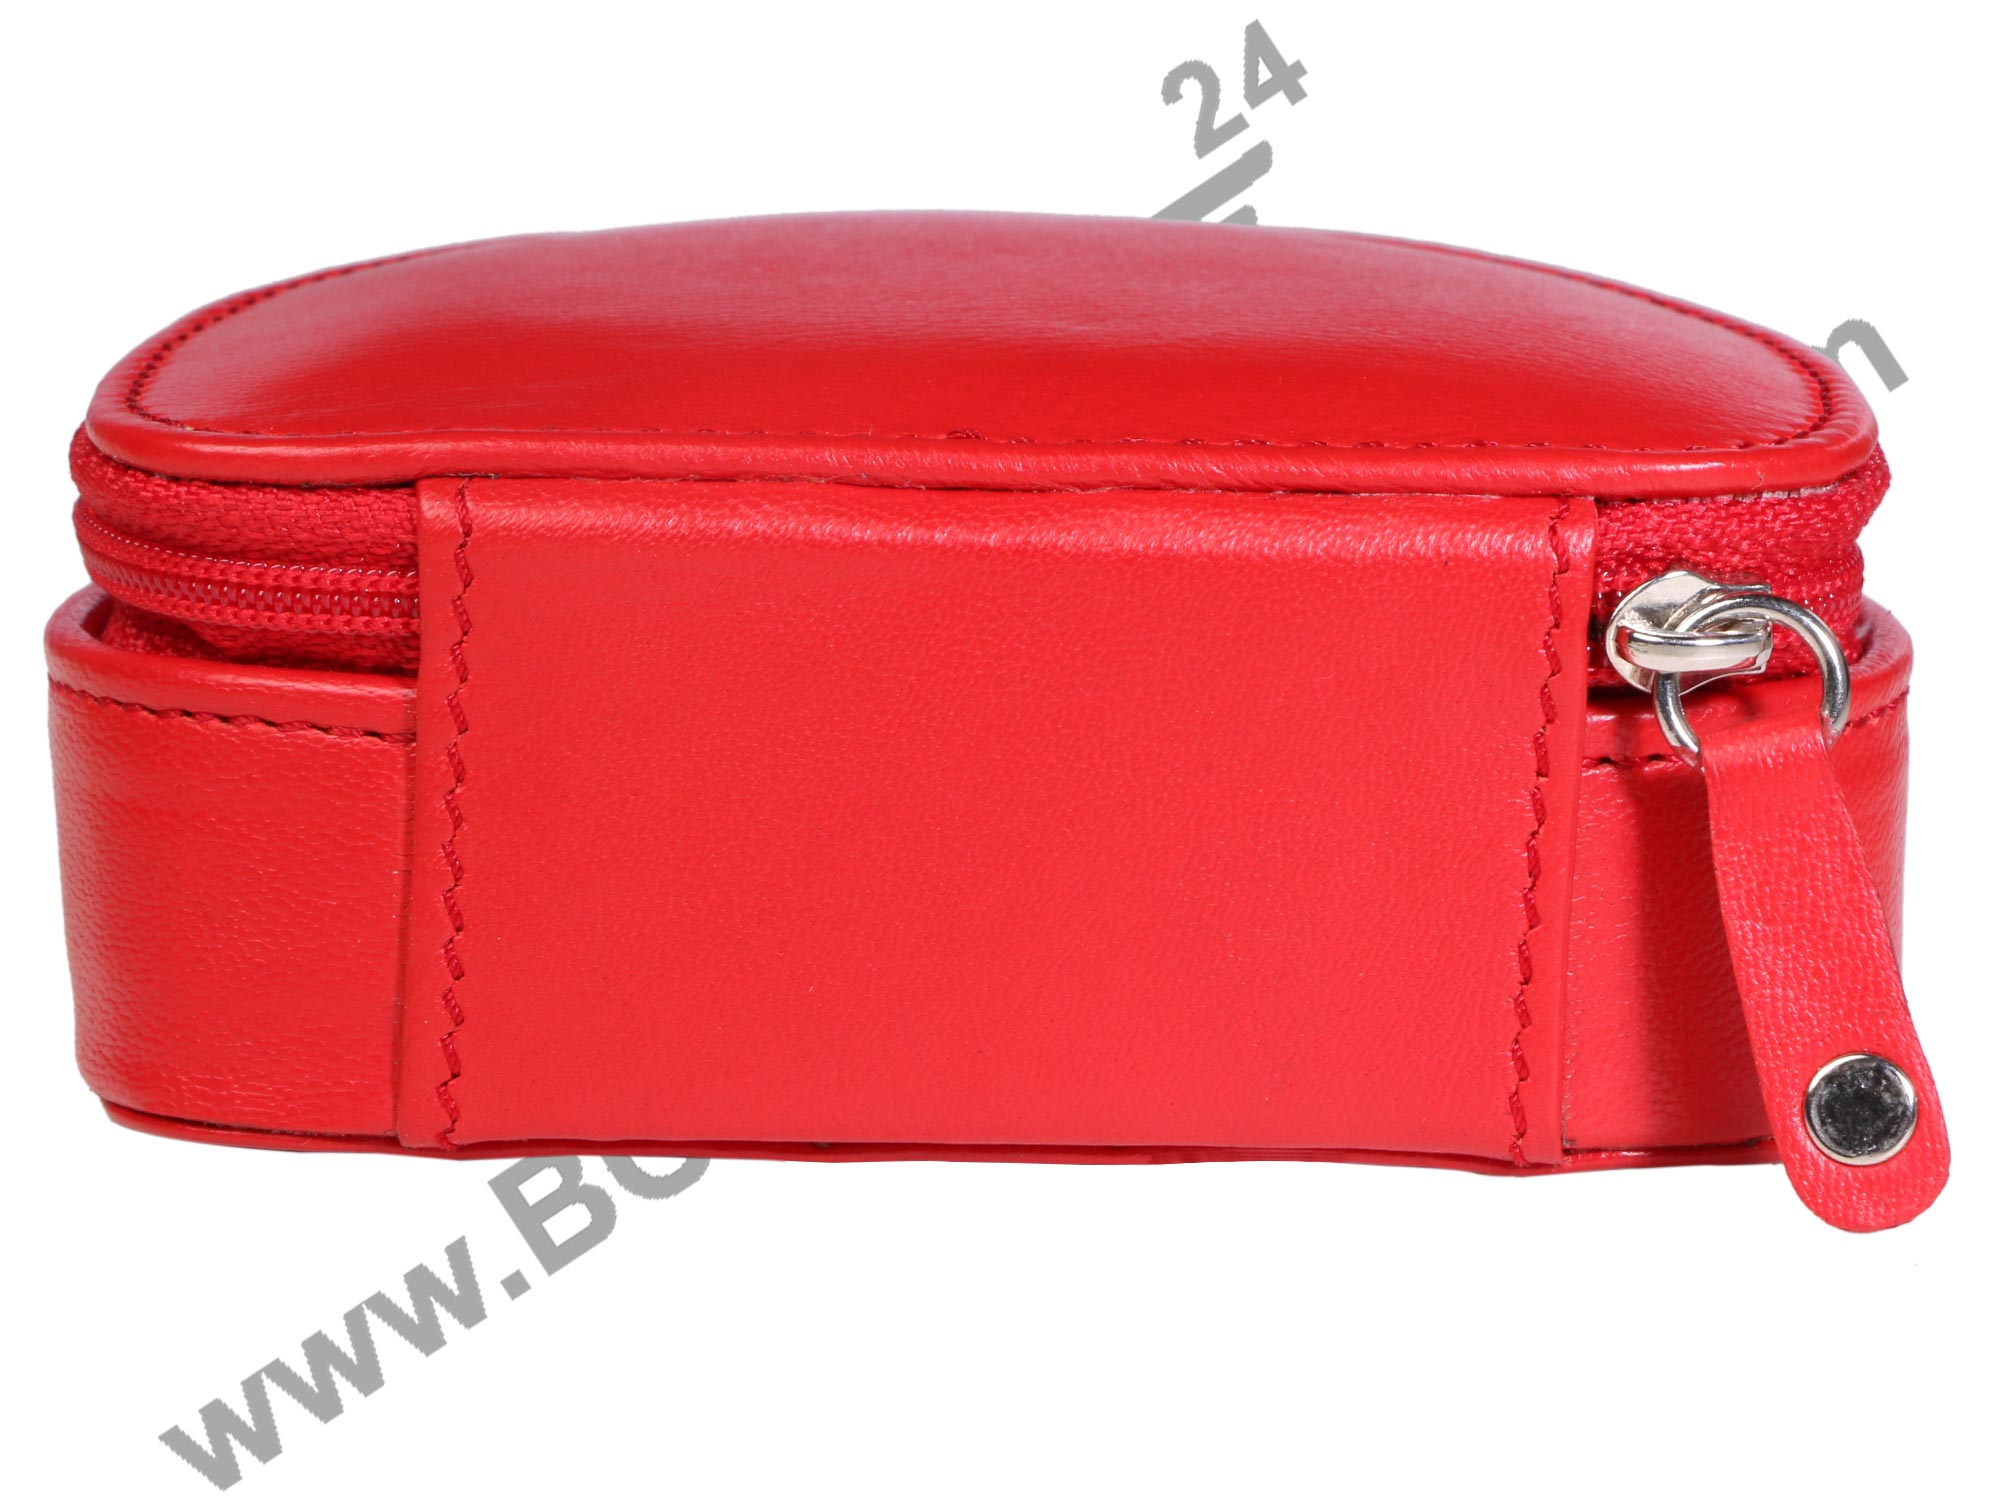 Back side image of red TRAVEL SMALL JEWELERY CASE.  It is zipped